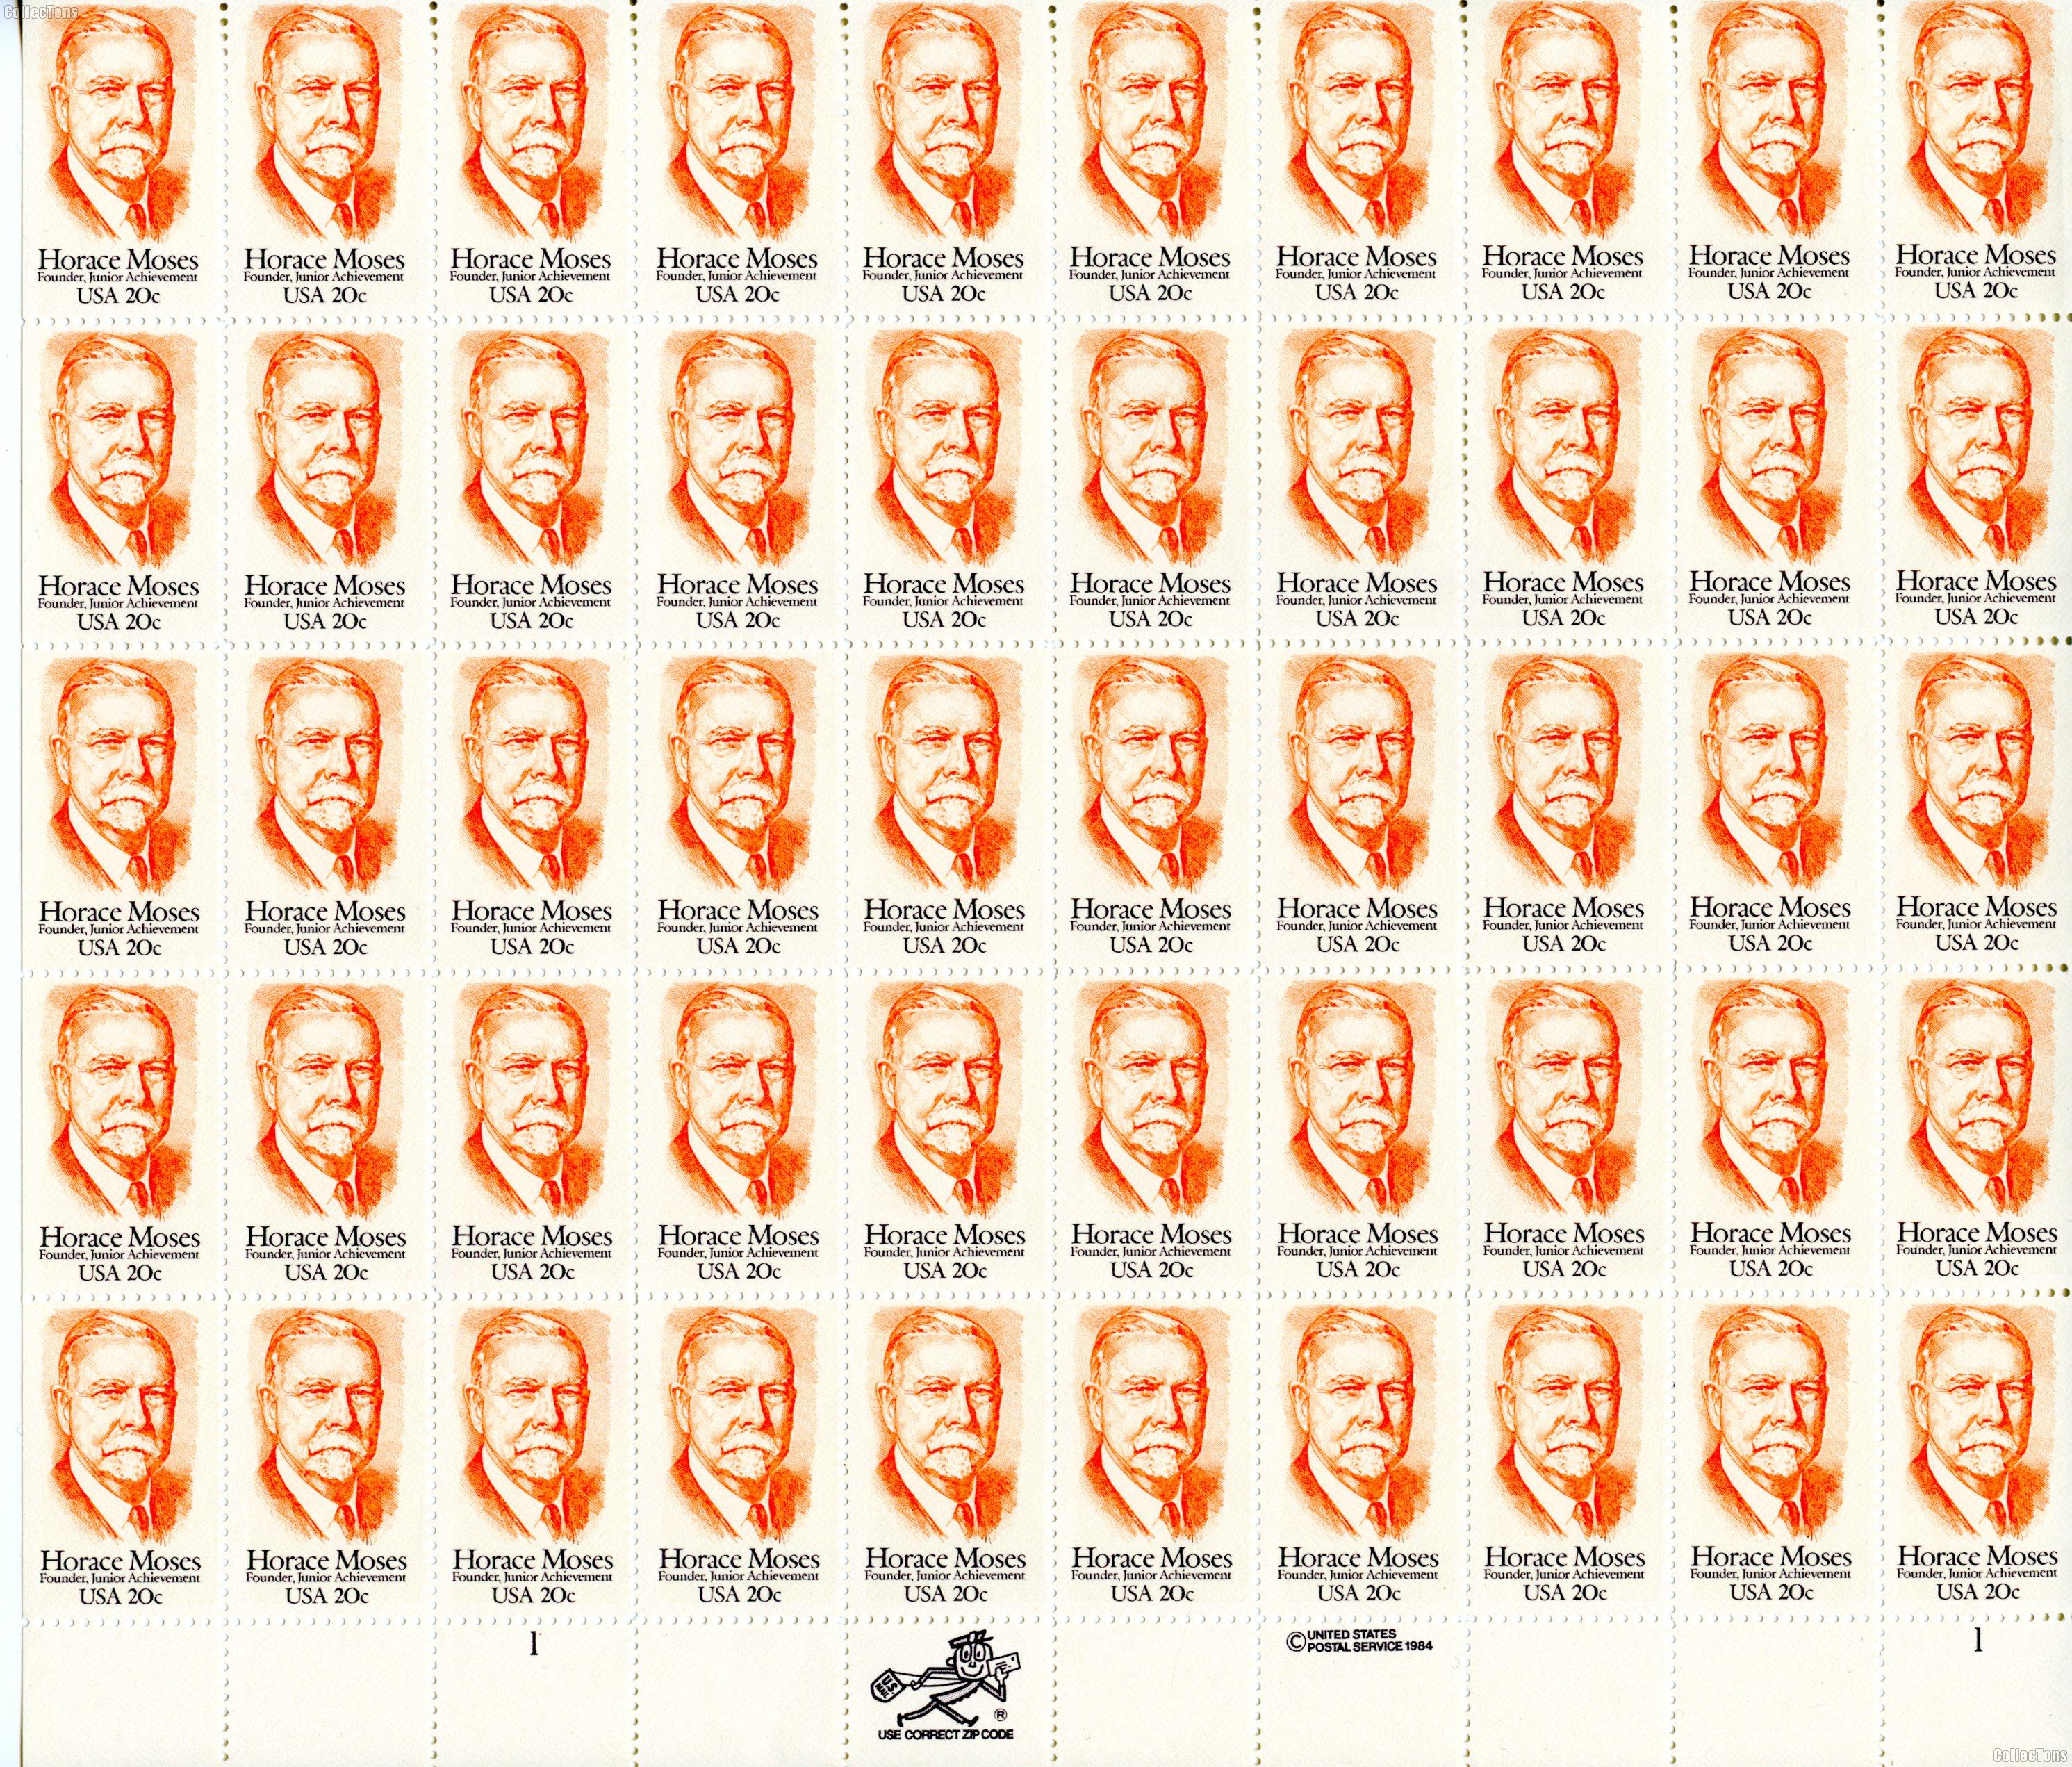 1984 Horace Moses 20 Cent US Postage Stamp MNH Sheet of 50 Scott #2095